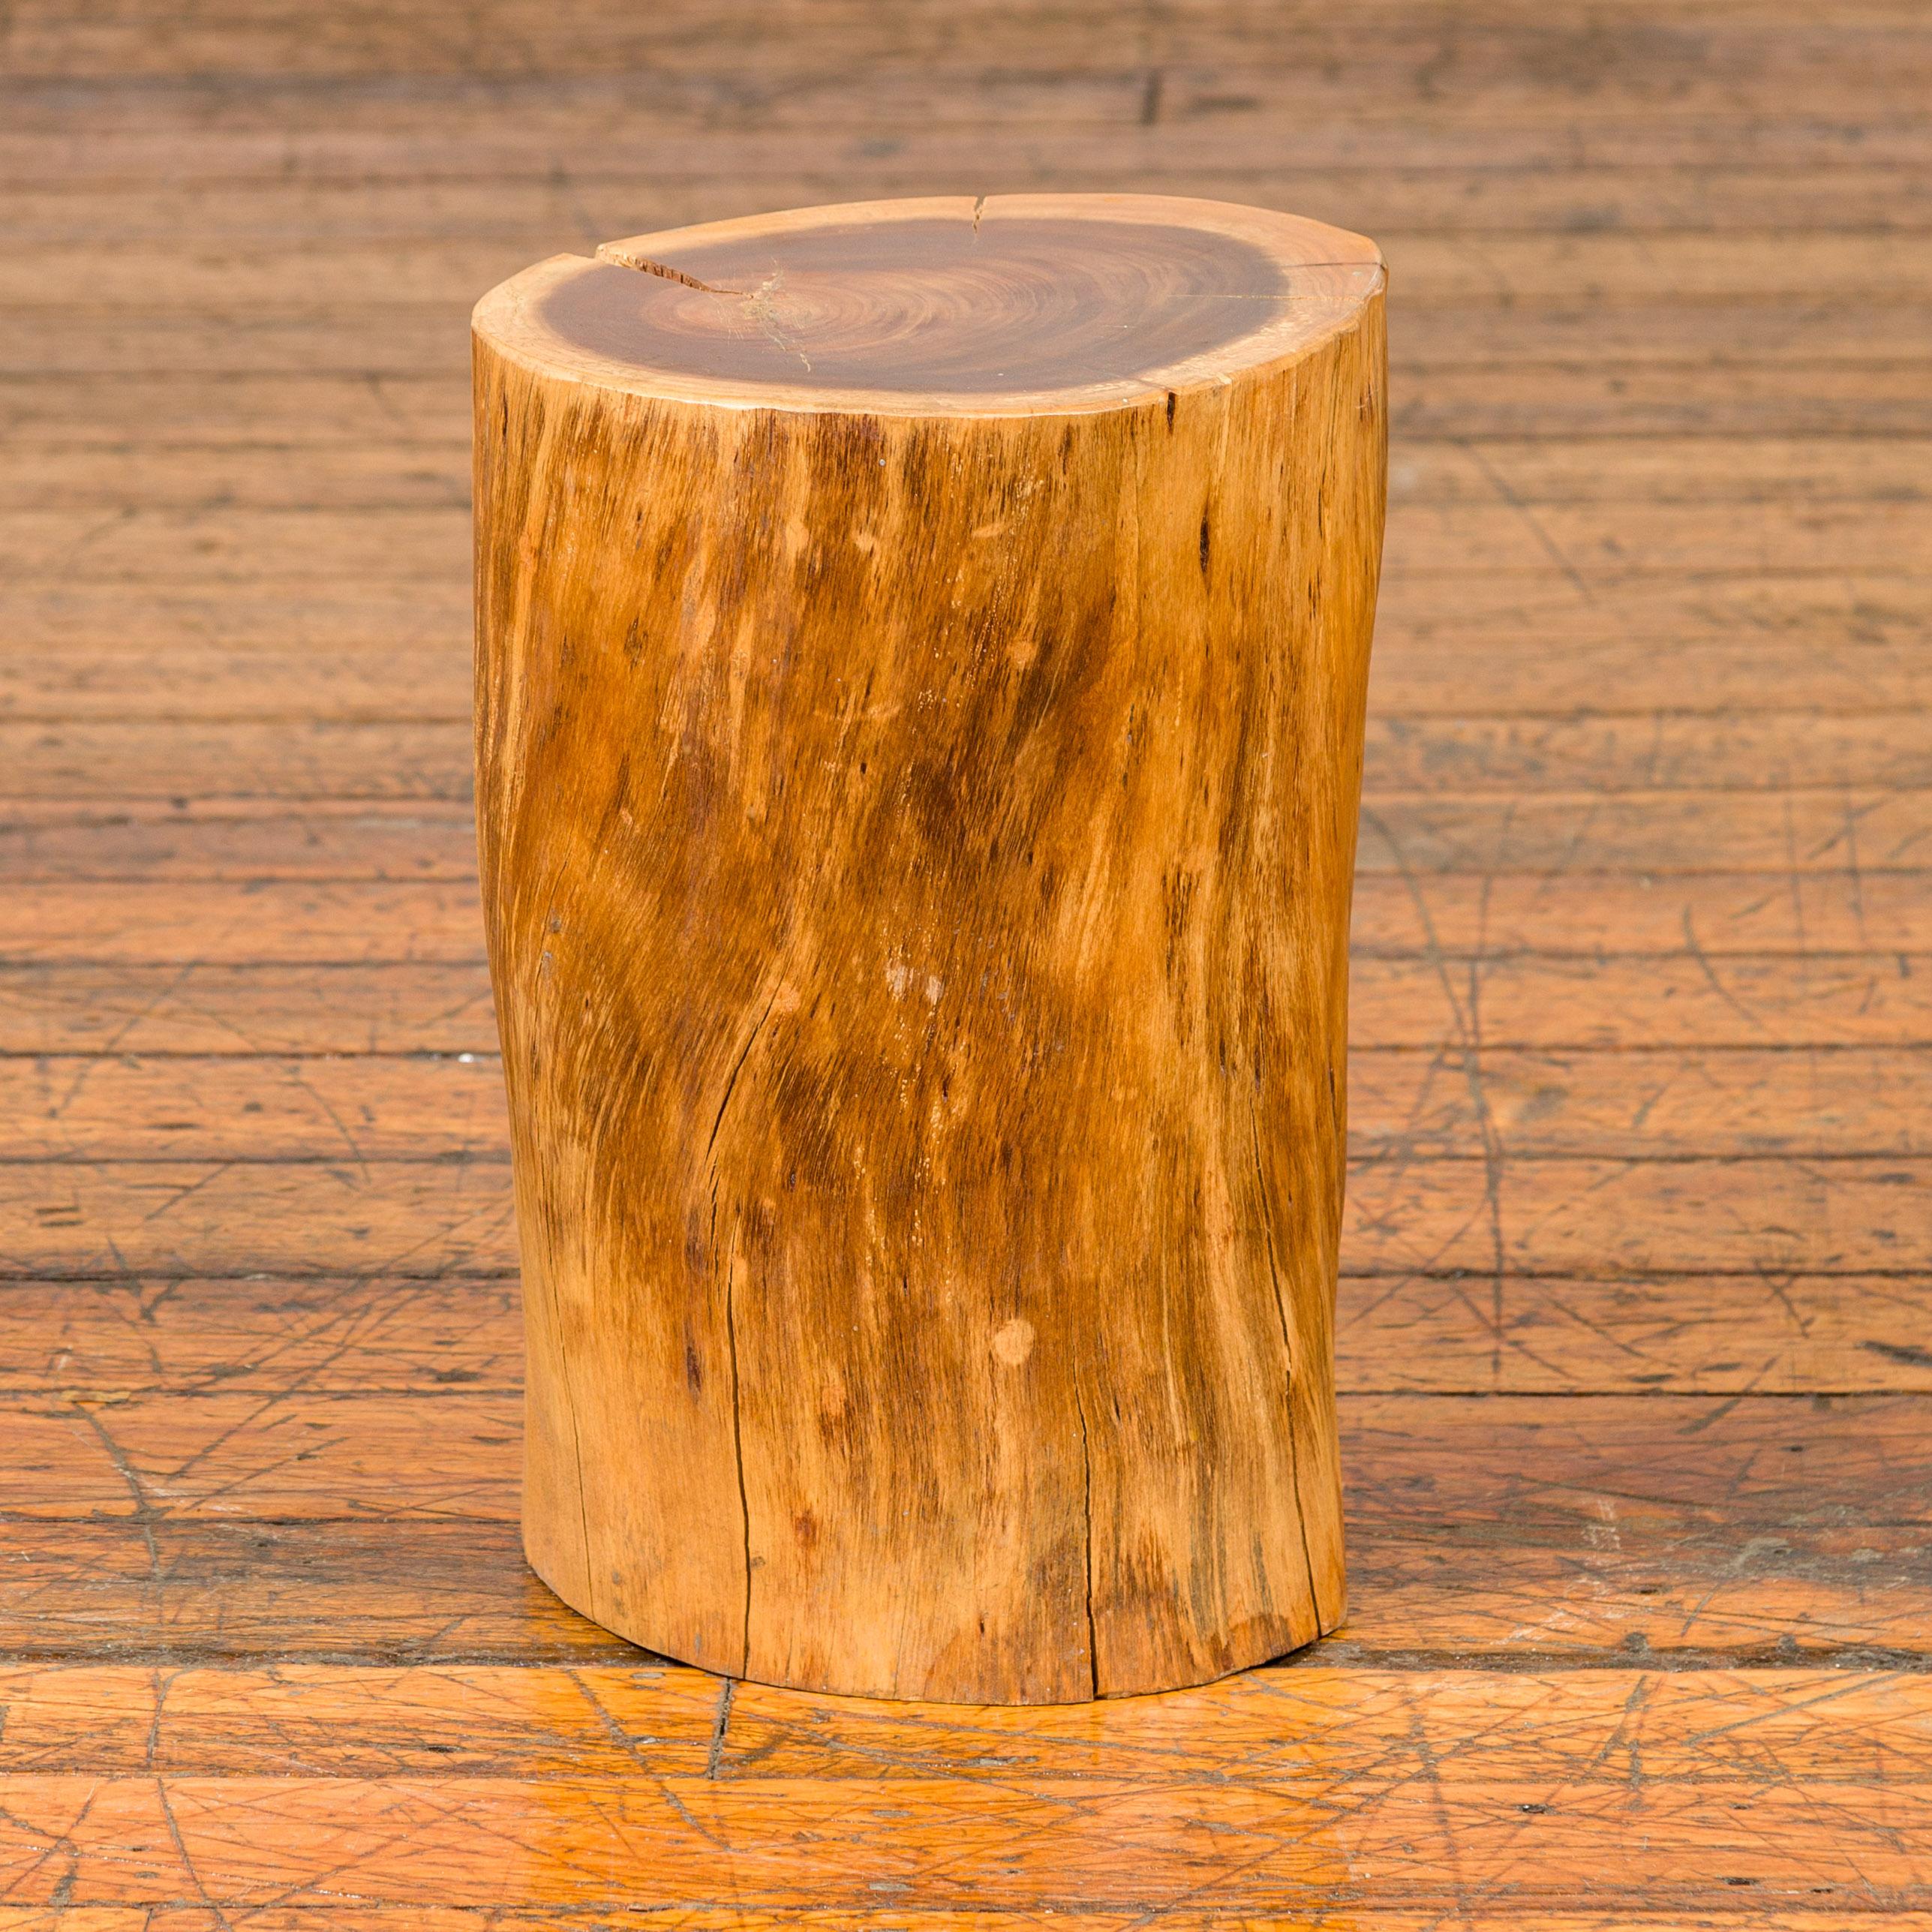 A rustic Thai vintage tree stump that can be used as a stool, pedestal or drinks table. Versatile and sturdy all at once, this vintage Thai tree stump will be a problem solver in any home. Used indoors or under a covered patio, its organic presence